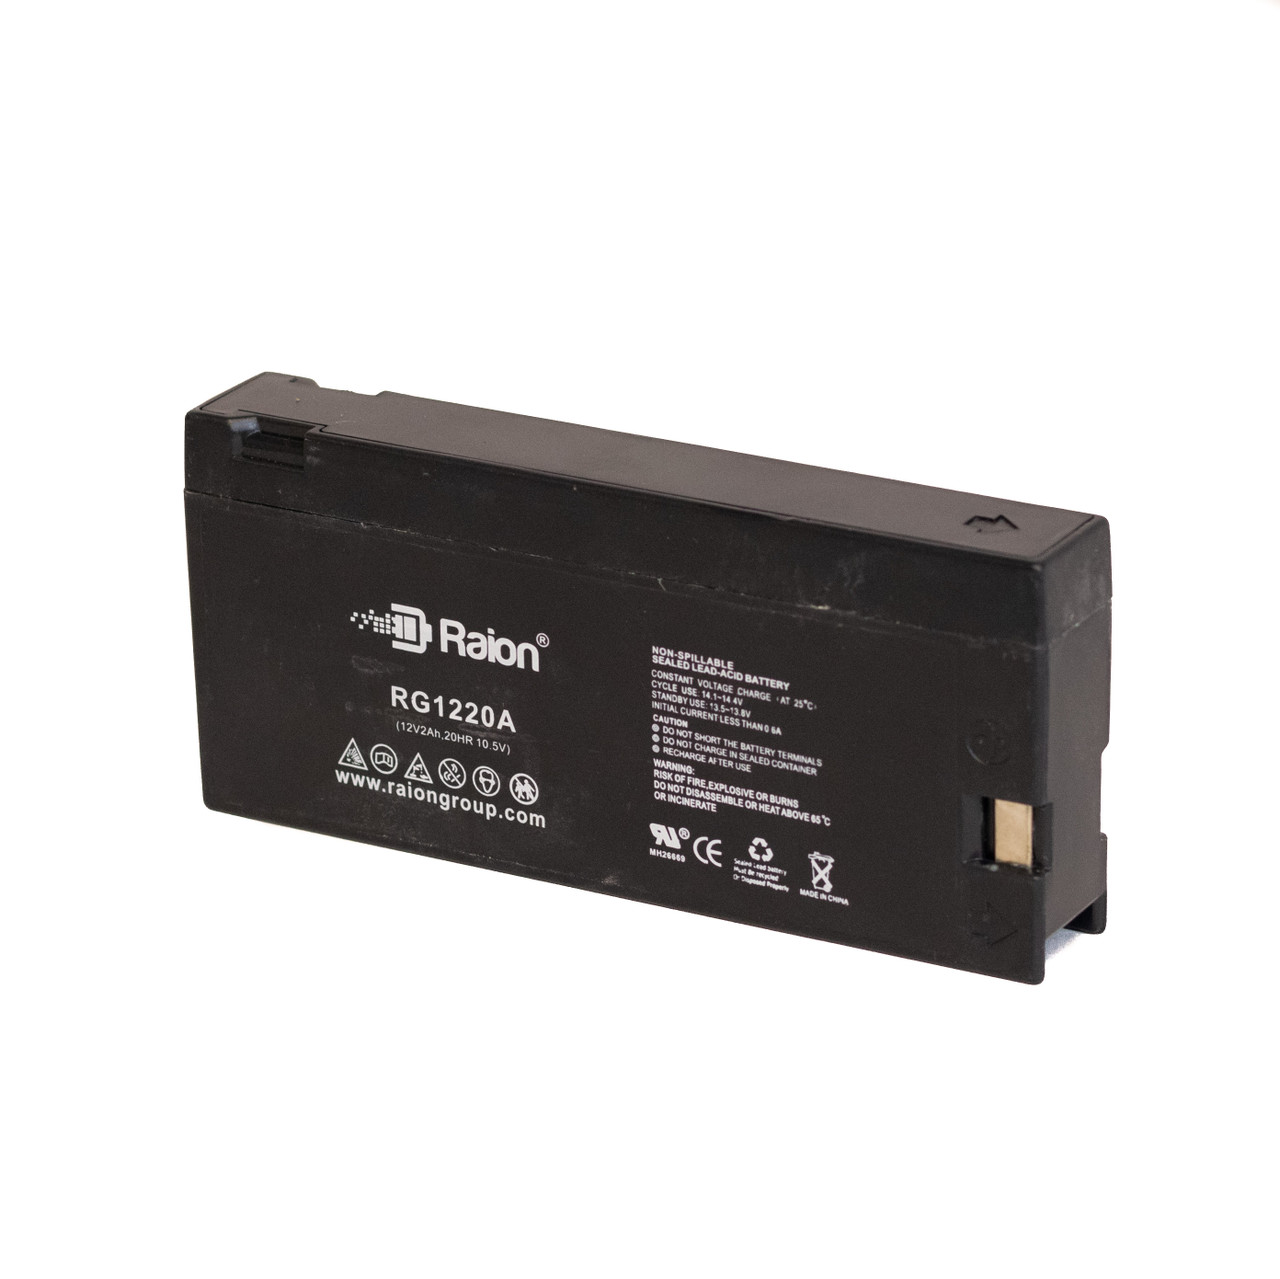 Raion Power RG1220A Replacement Battery for Montgomery Ward 63557943